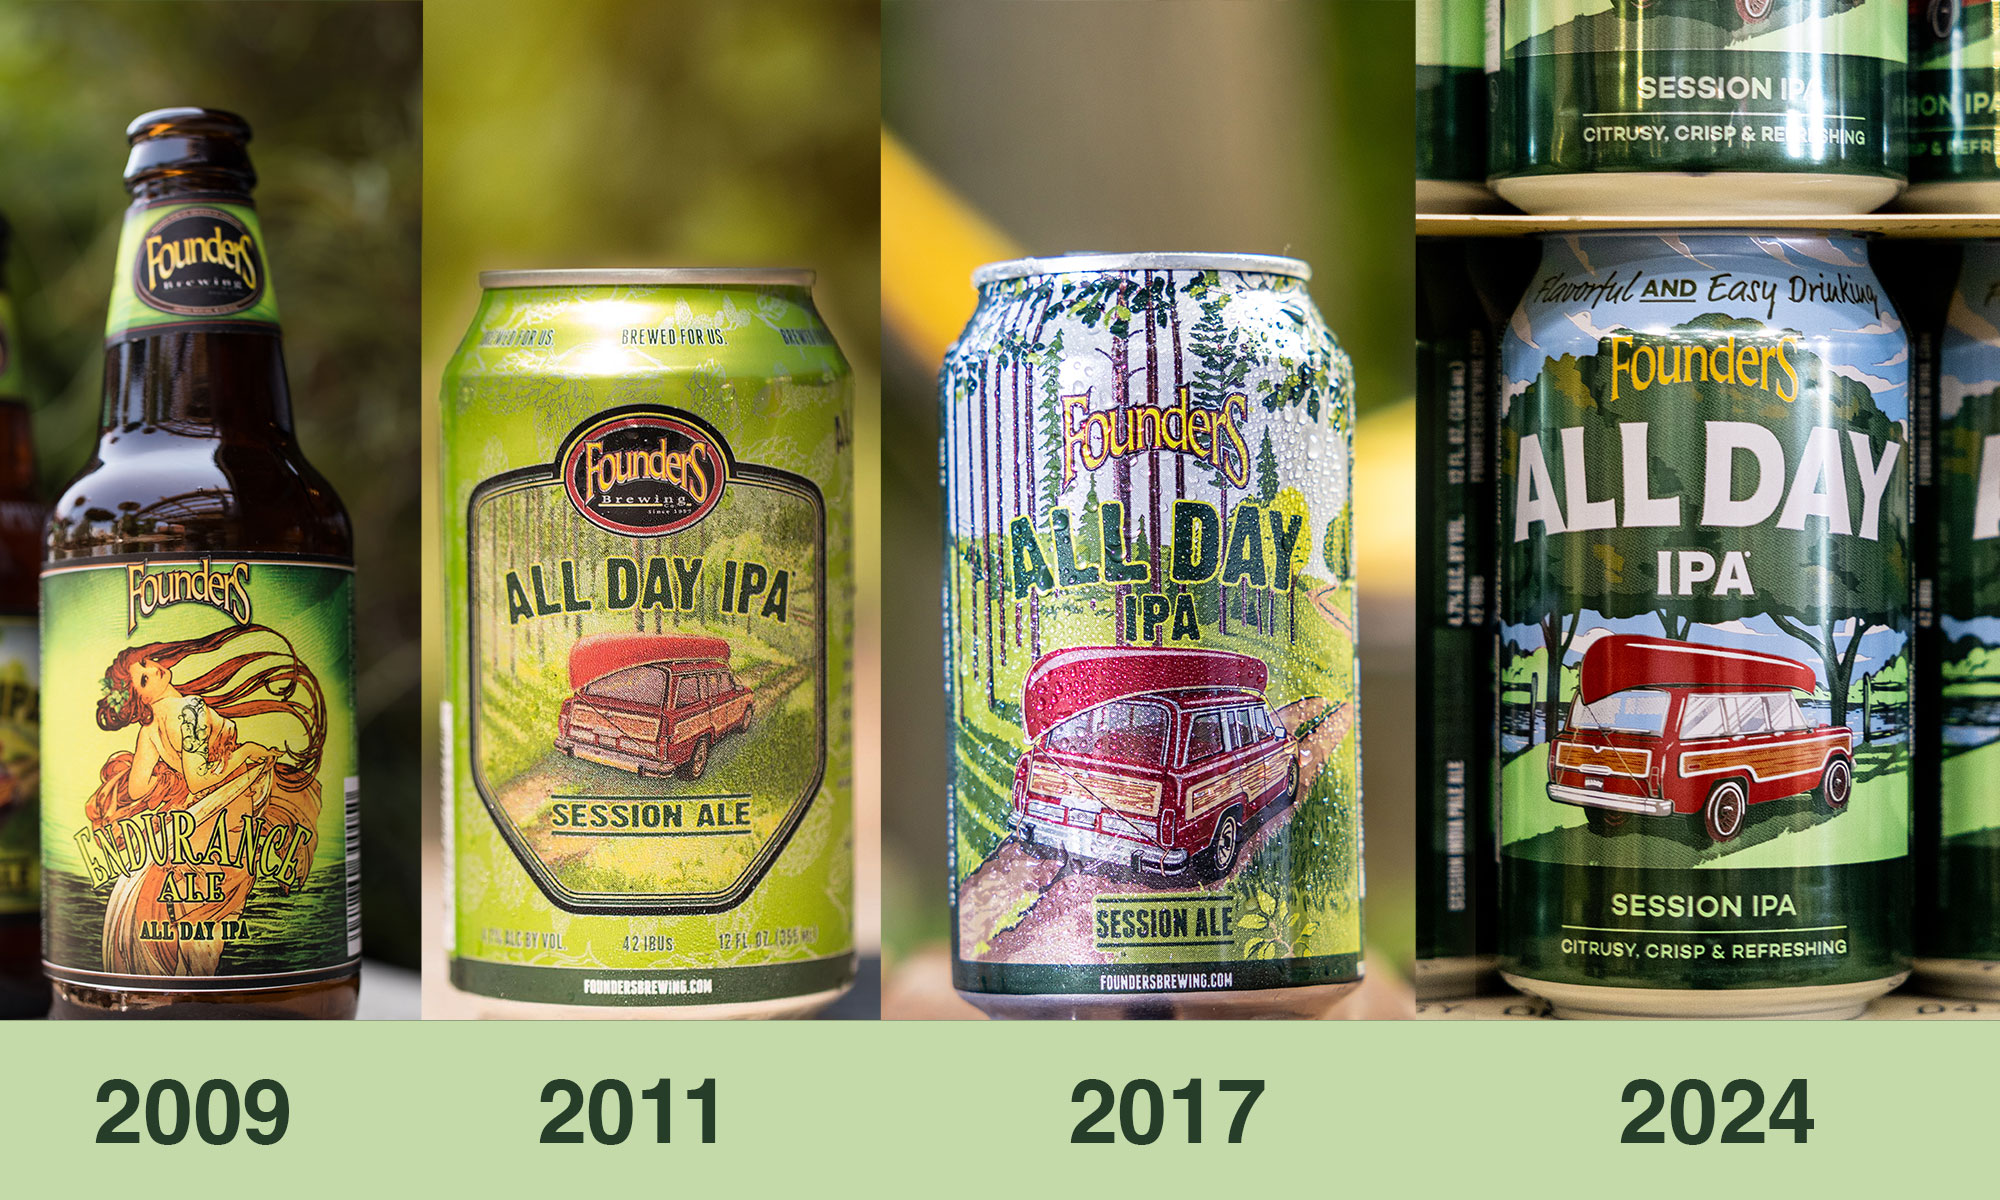 All Day IPA cans from 2009 to 2024